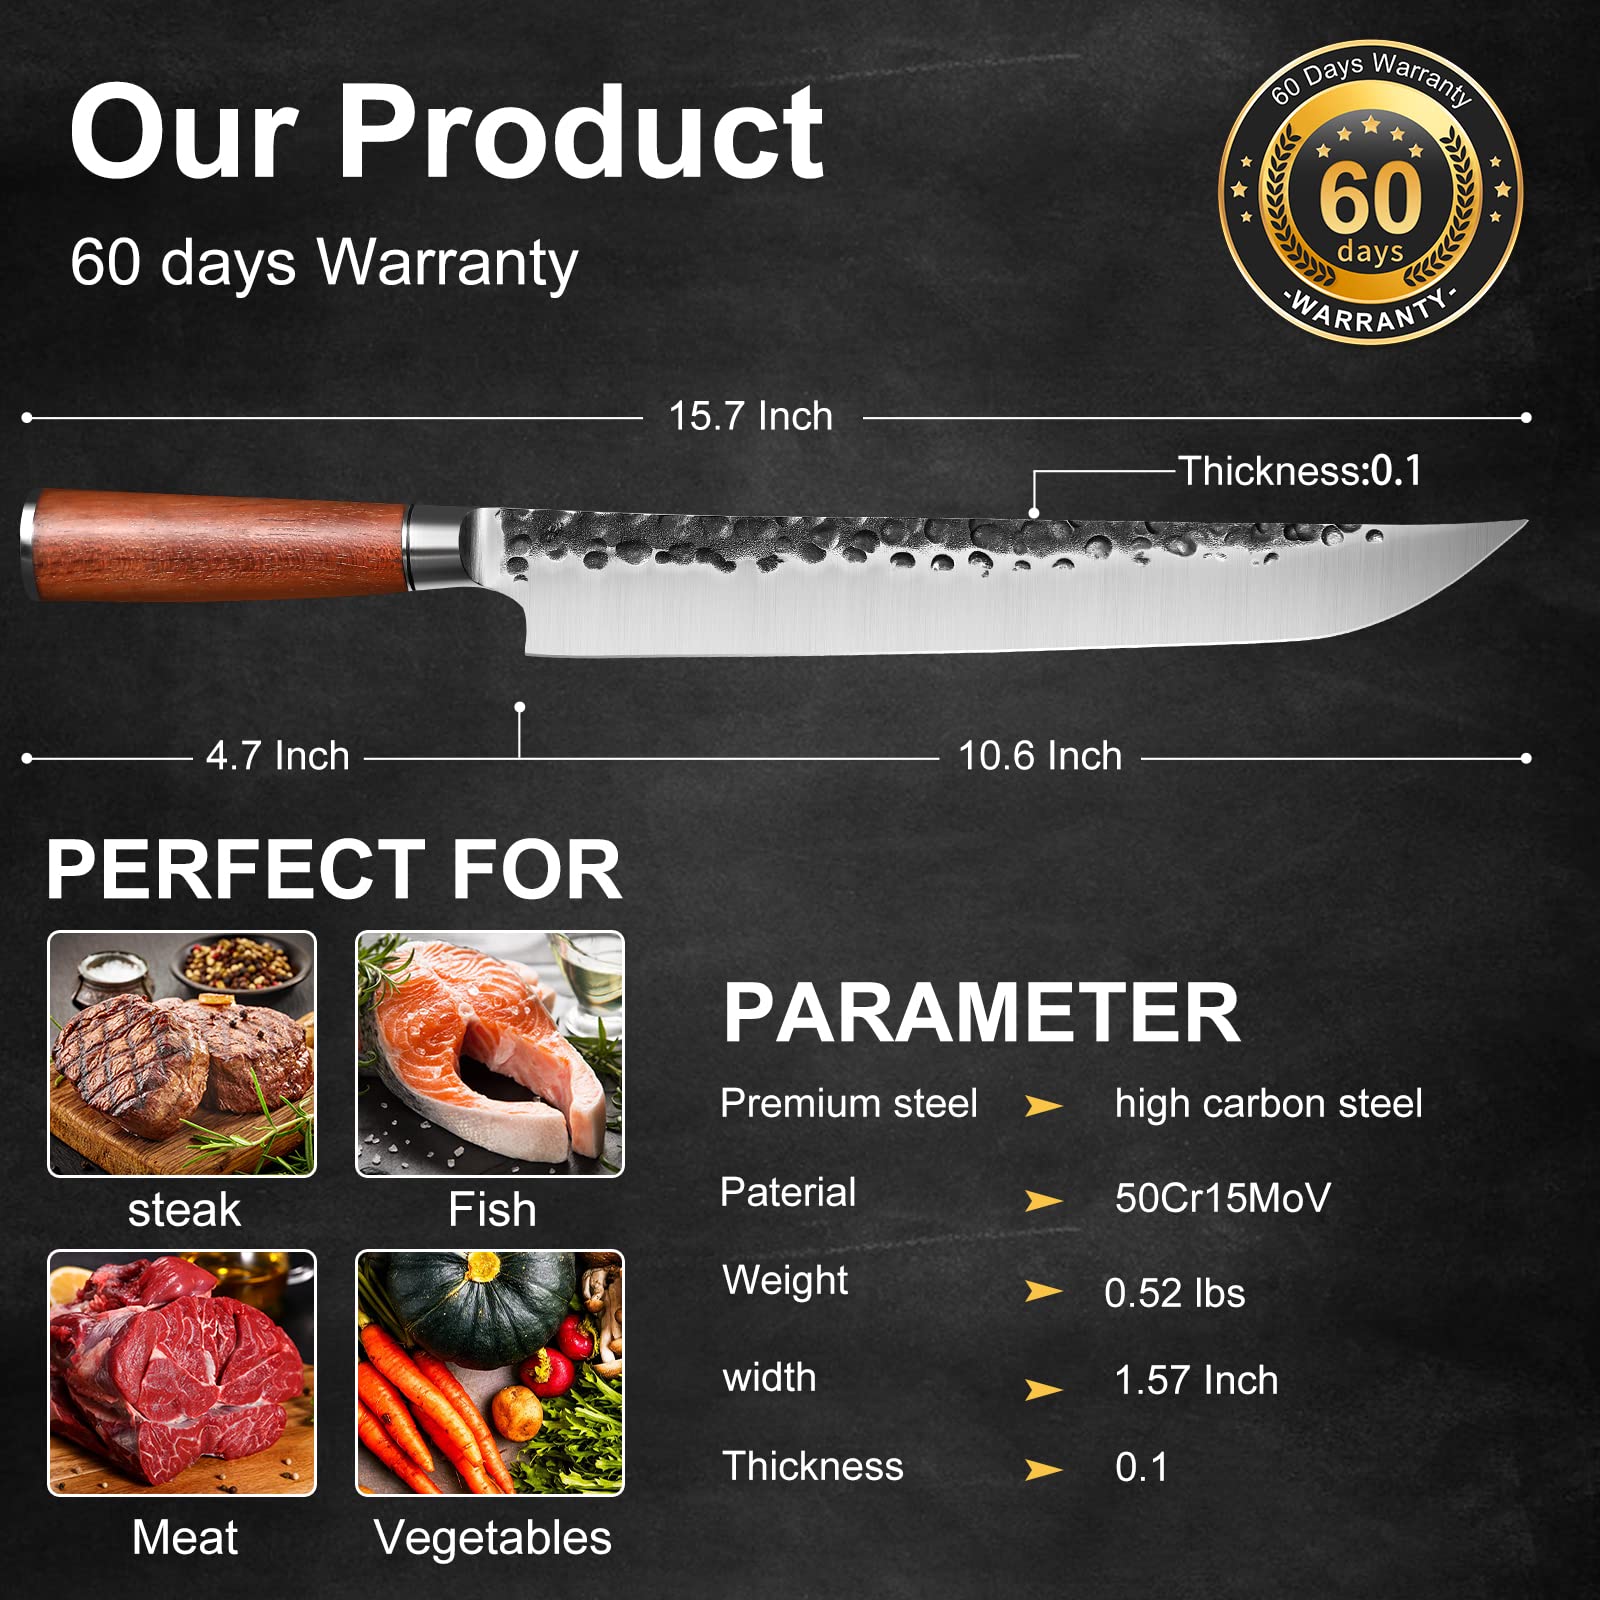 Ink Plums 10.5 Inch Carving Knife, Hand Forged Japanese Butcher Knife For Meat Cuting,Trusted Victorinox Butcher Knife For BBQ,Outdoor Camping